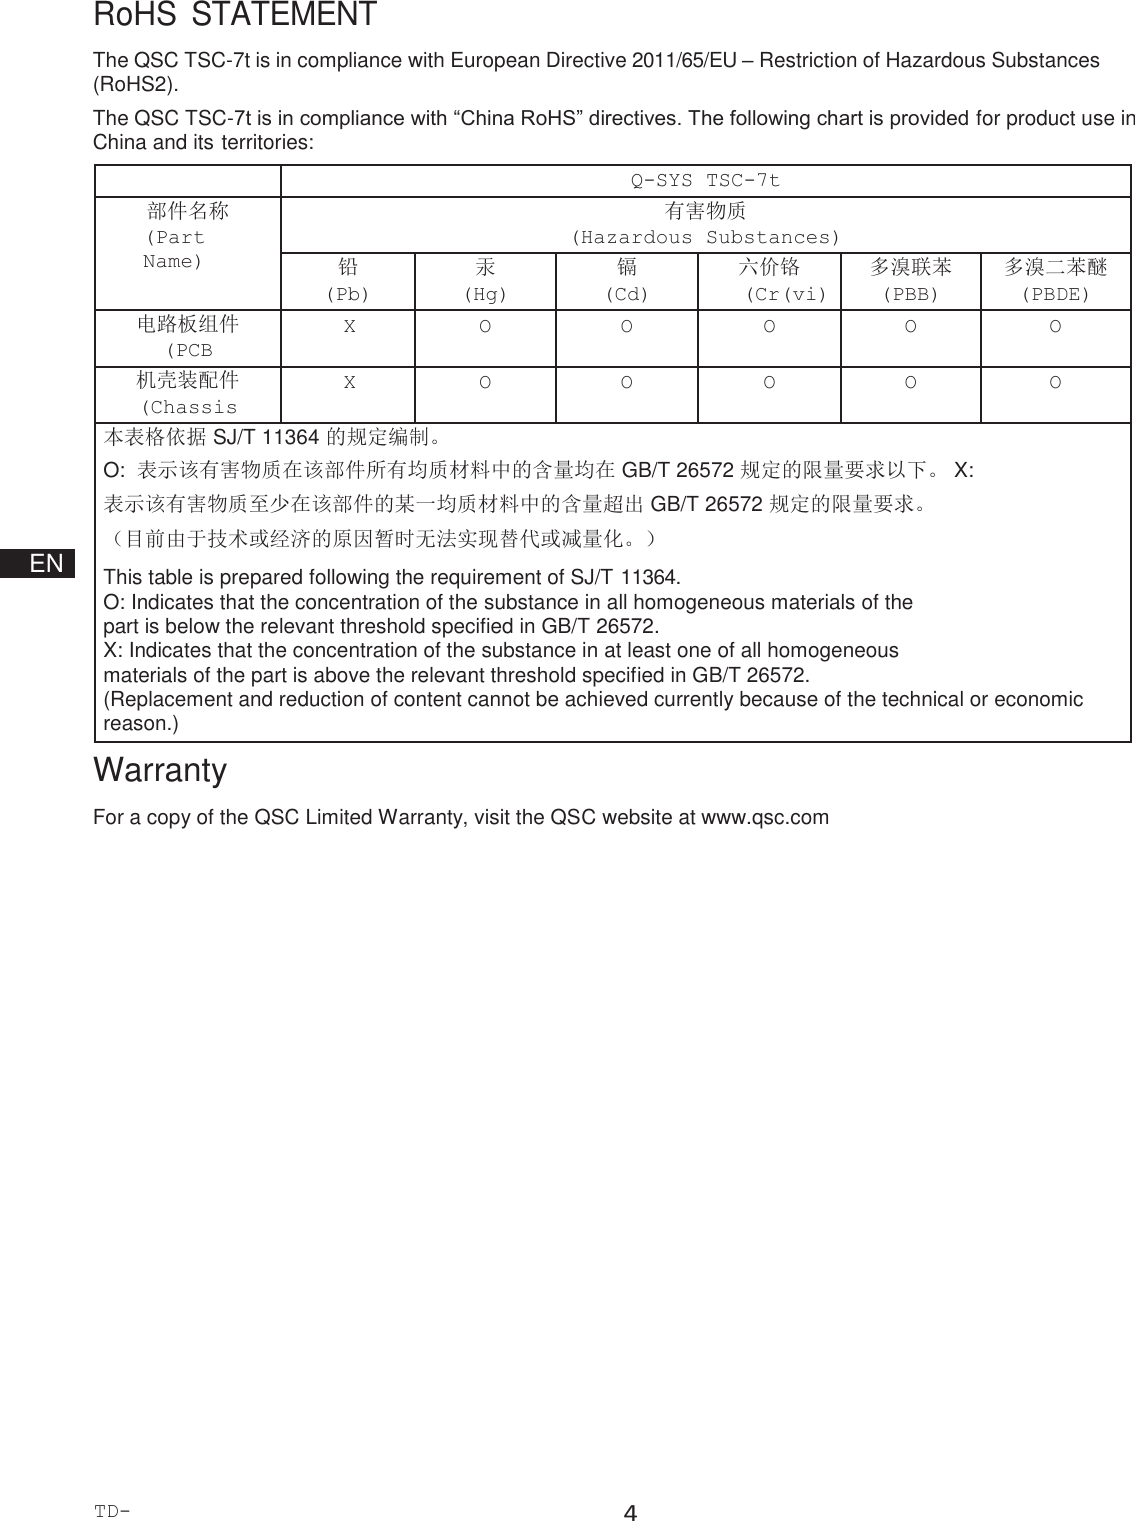 TD-000508-00-B 4  RoHS  STATEMENT The QSC TSC-7t is in compliance with European Directive 2011/65/EU – Restriction of Hazardous Substances (RoHS2). The QSC TSC-7t is in compliance with “China RoHS” directives. The following chart is provided for product use in China and its territories:                     EN         Warranty For a copy of the QSC Limited Warranty, visit the QSC website at www.qsc.com  Q-SYS TSC-7t 部件名称 (Part Name) 有害物质 (Hazardous Substances) 铅 (Pb) 汞 (Hg) 镉 (Cd) 六价铬 (Cr(vi)) 多溴联苯 (PBB) 多溴二苯醚 (PBDE) 电路板组件 (PCB Assemblies) X O O O O O 机壳装配件 (Chassis Assemblies) X O O O O O 本表格依据 SJ/T 11364 的规定编制。 O:  表示该有害物质在该部件所有均质材料中的含量均在 GB/T 26572 规定的限量要求以下。 X:  表示该有害物质至少在该部件的某一均质材料中的含量超出 GB/T 26572 规定的限量要求。 （目前由于技术或经济的原因暂时无法实现替代或减量化。） This table is prepared following the requirement of SJ/T 11364. O: Indicates that the concentration of the substance in all homogeneous materials of the part is below the relevant threshold specified in GB/T 26572. X: Indicates that the concentration of the substance in at least one of all homogeneous materials of the part is above the relevant threshold specified in GB/T 26572. (Replacement and reduction of content cannot be achieved currently because of the technical or economic reason.)  